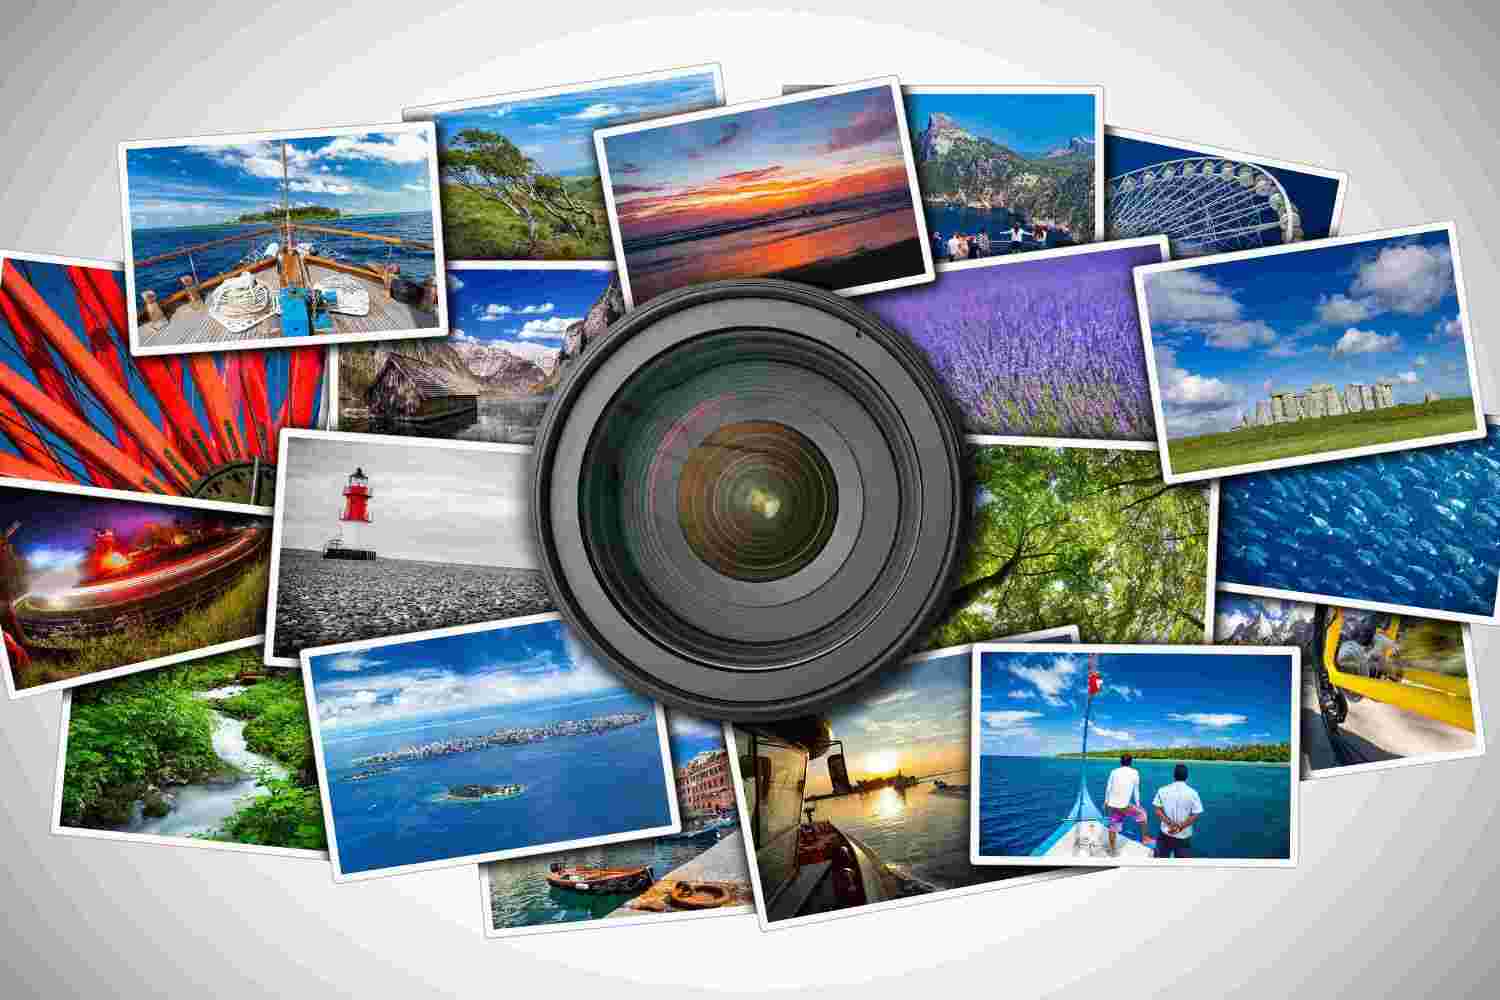 photos and lens Photo by Stockphoto-graf on shutterstock